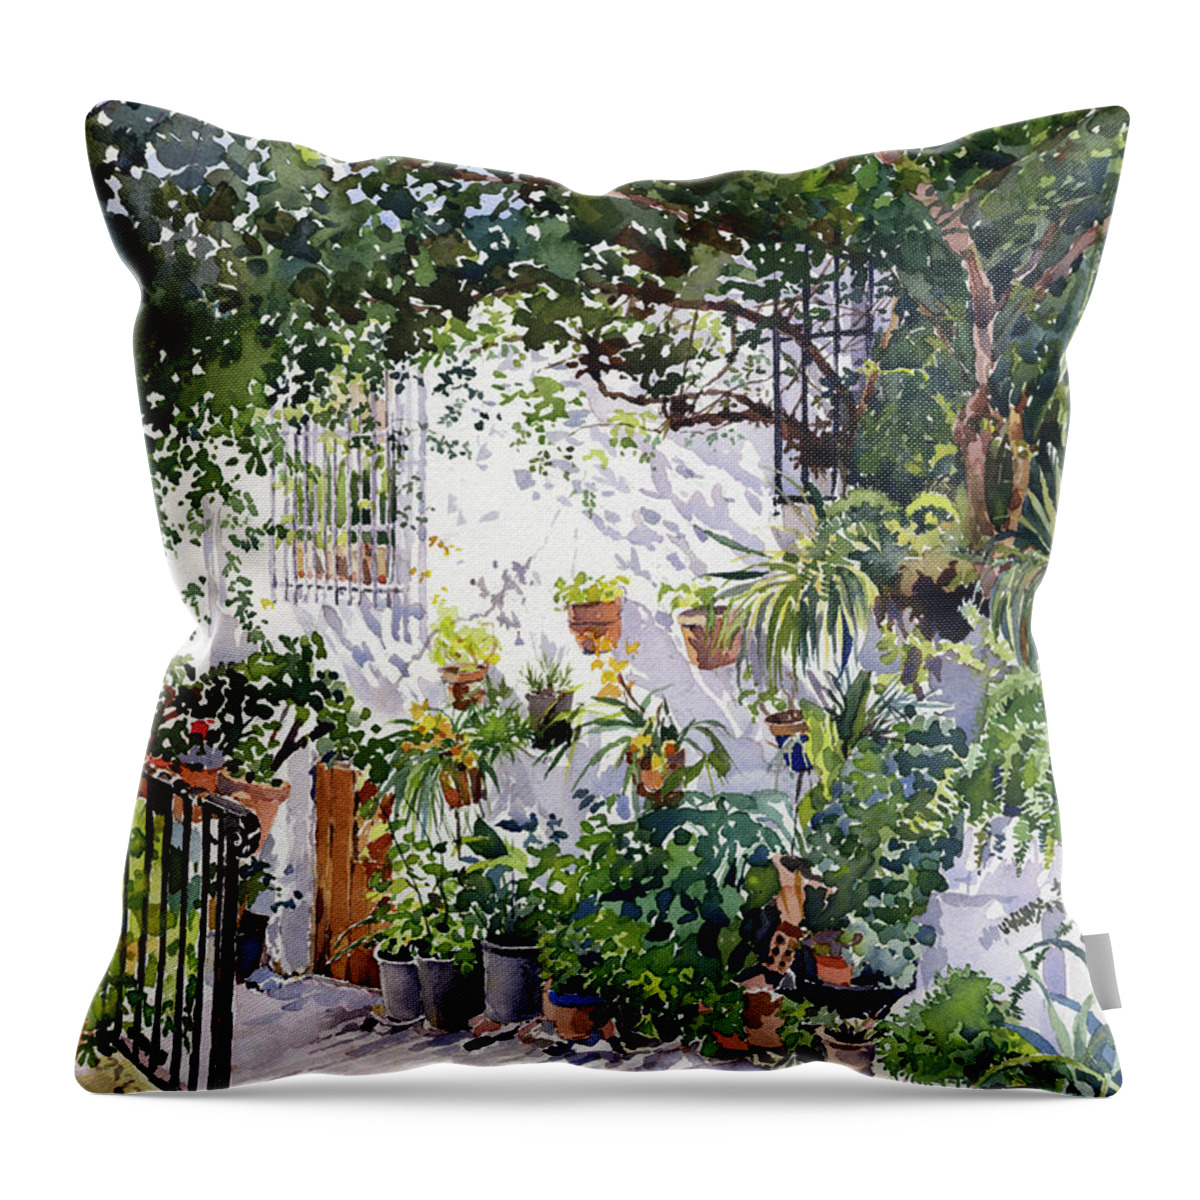 Watercolour Throw Pillow featuring the painting Rincon De Flores by Margaret Merry